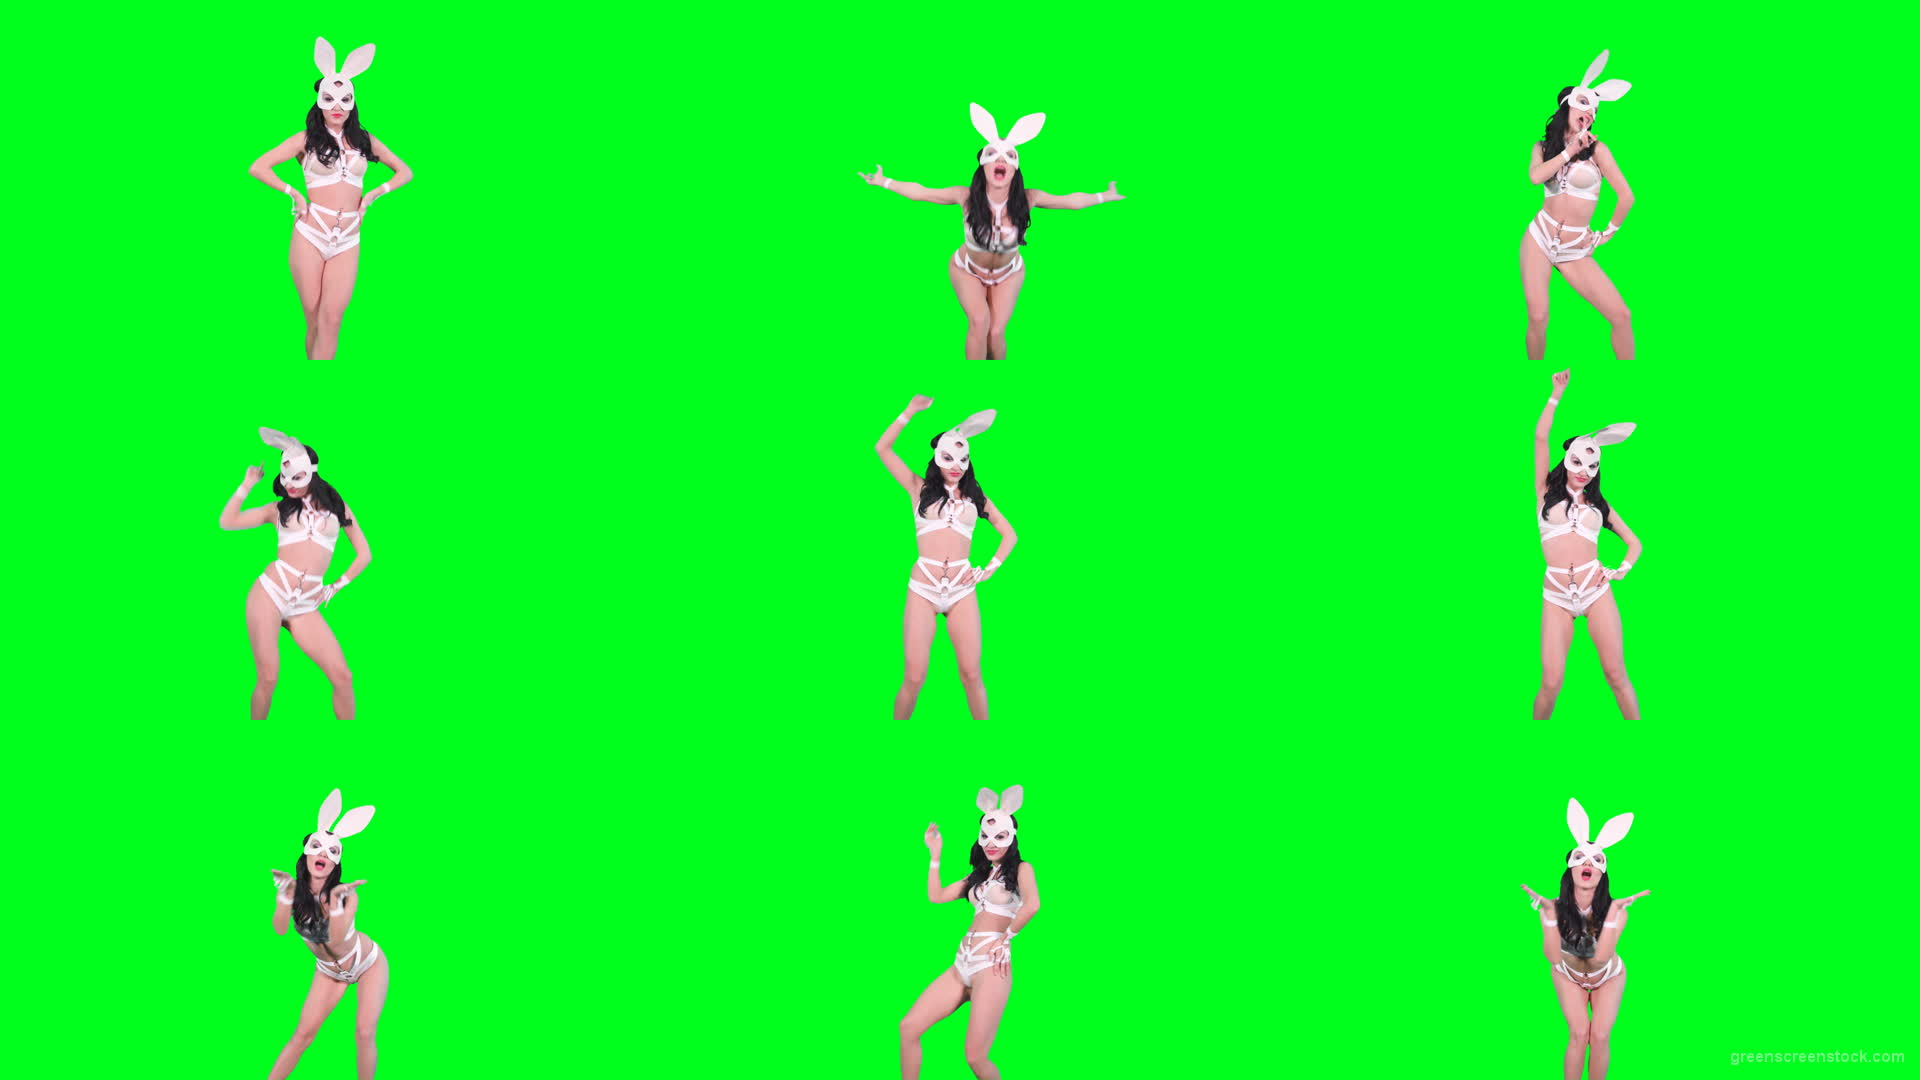 Girl-in-rabbit-bunny-mask-posing-and-show-gestures-on-green-screen-4K-Video-Footage-1920 Green Screen Stock